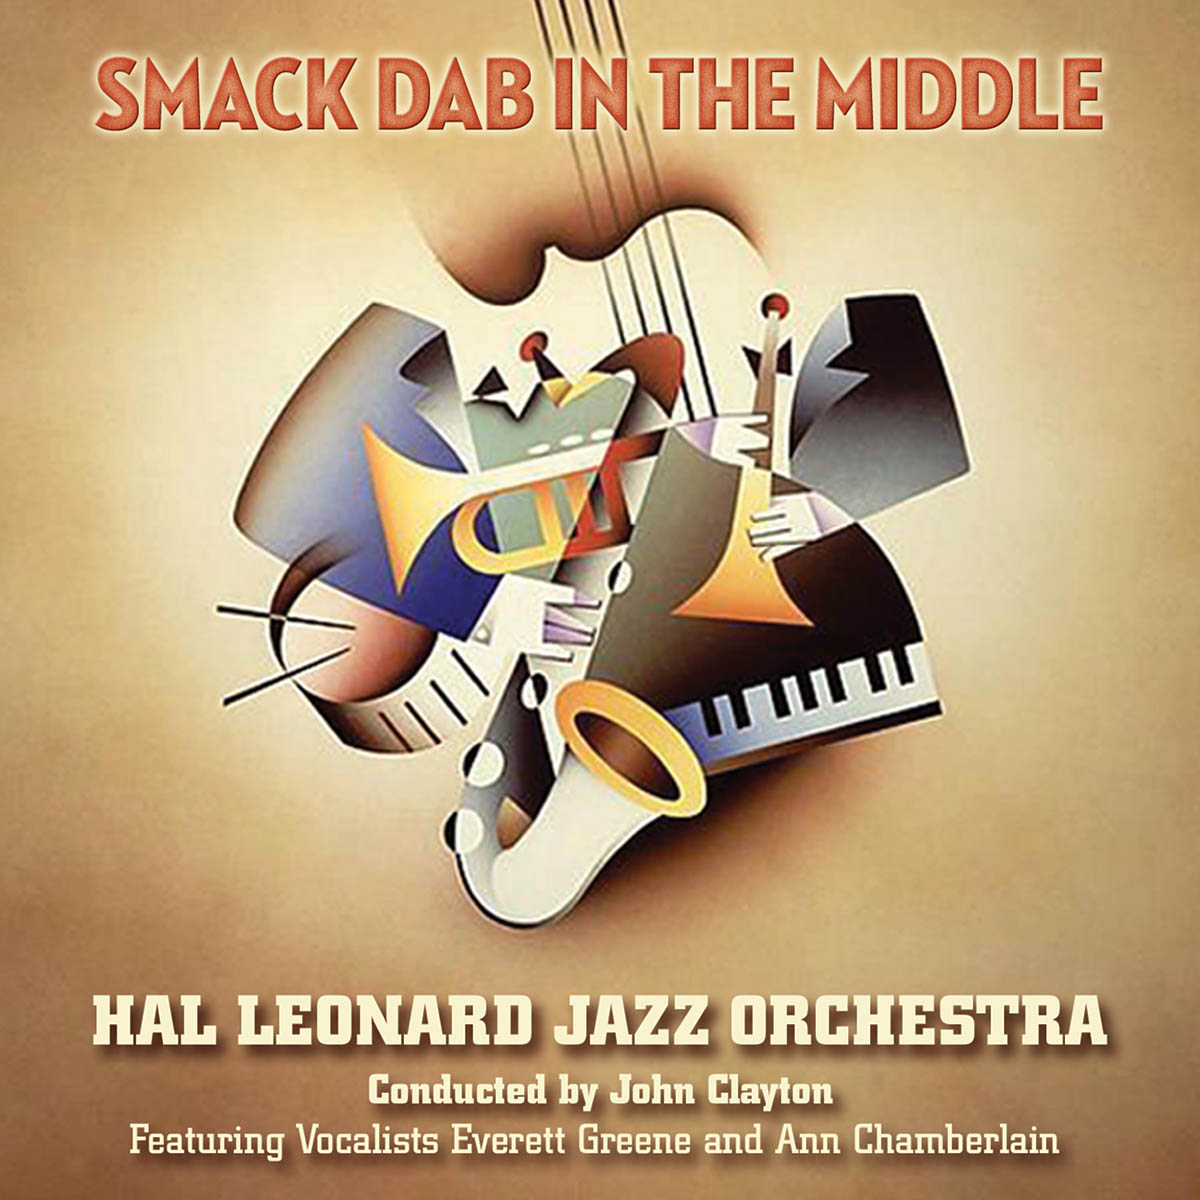 Smack Dab in the Middle: Jazz Ensemble: CD